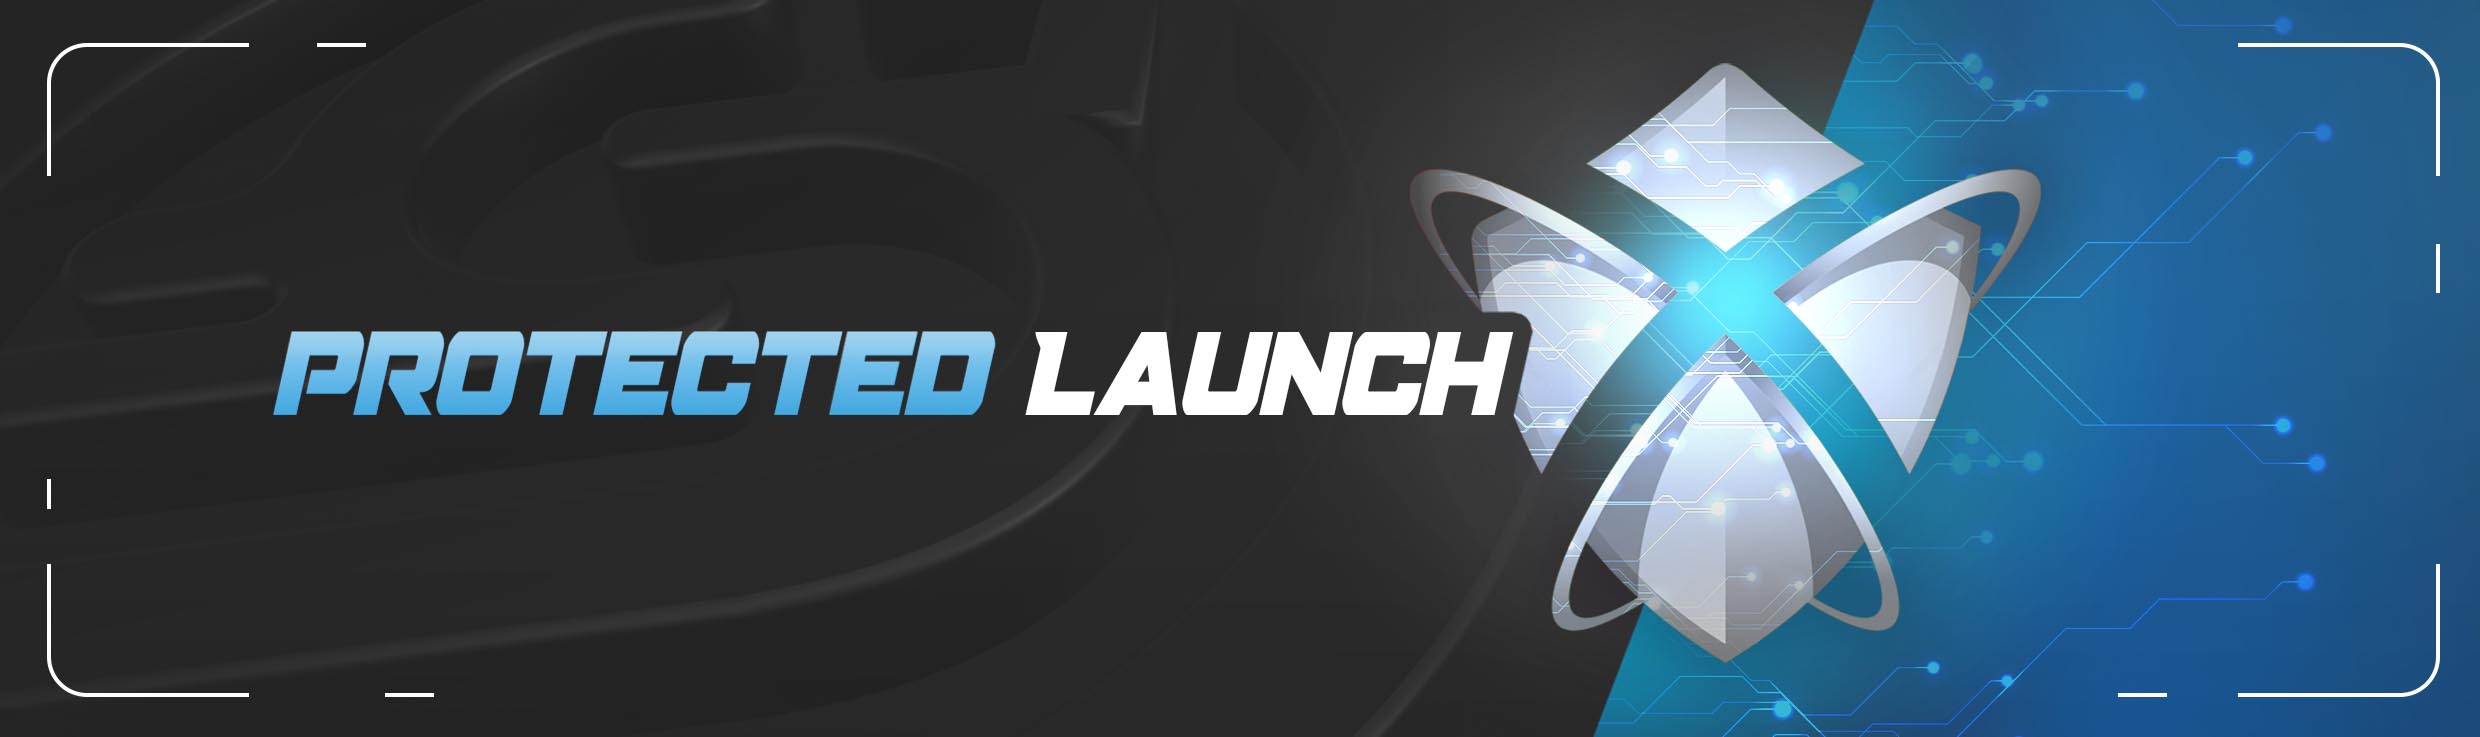 banner protected lanunch